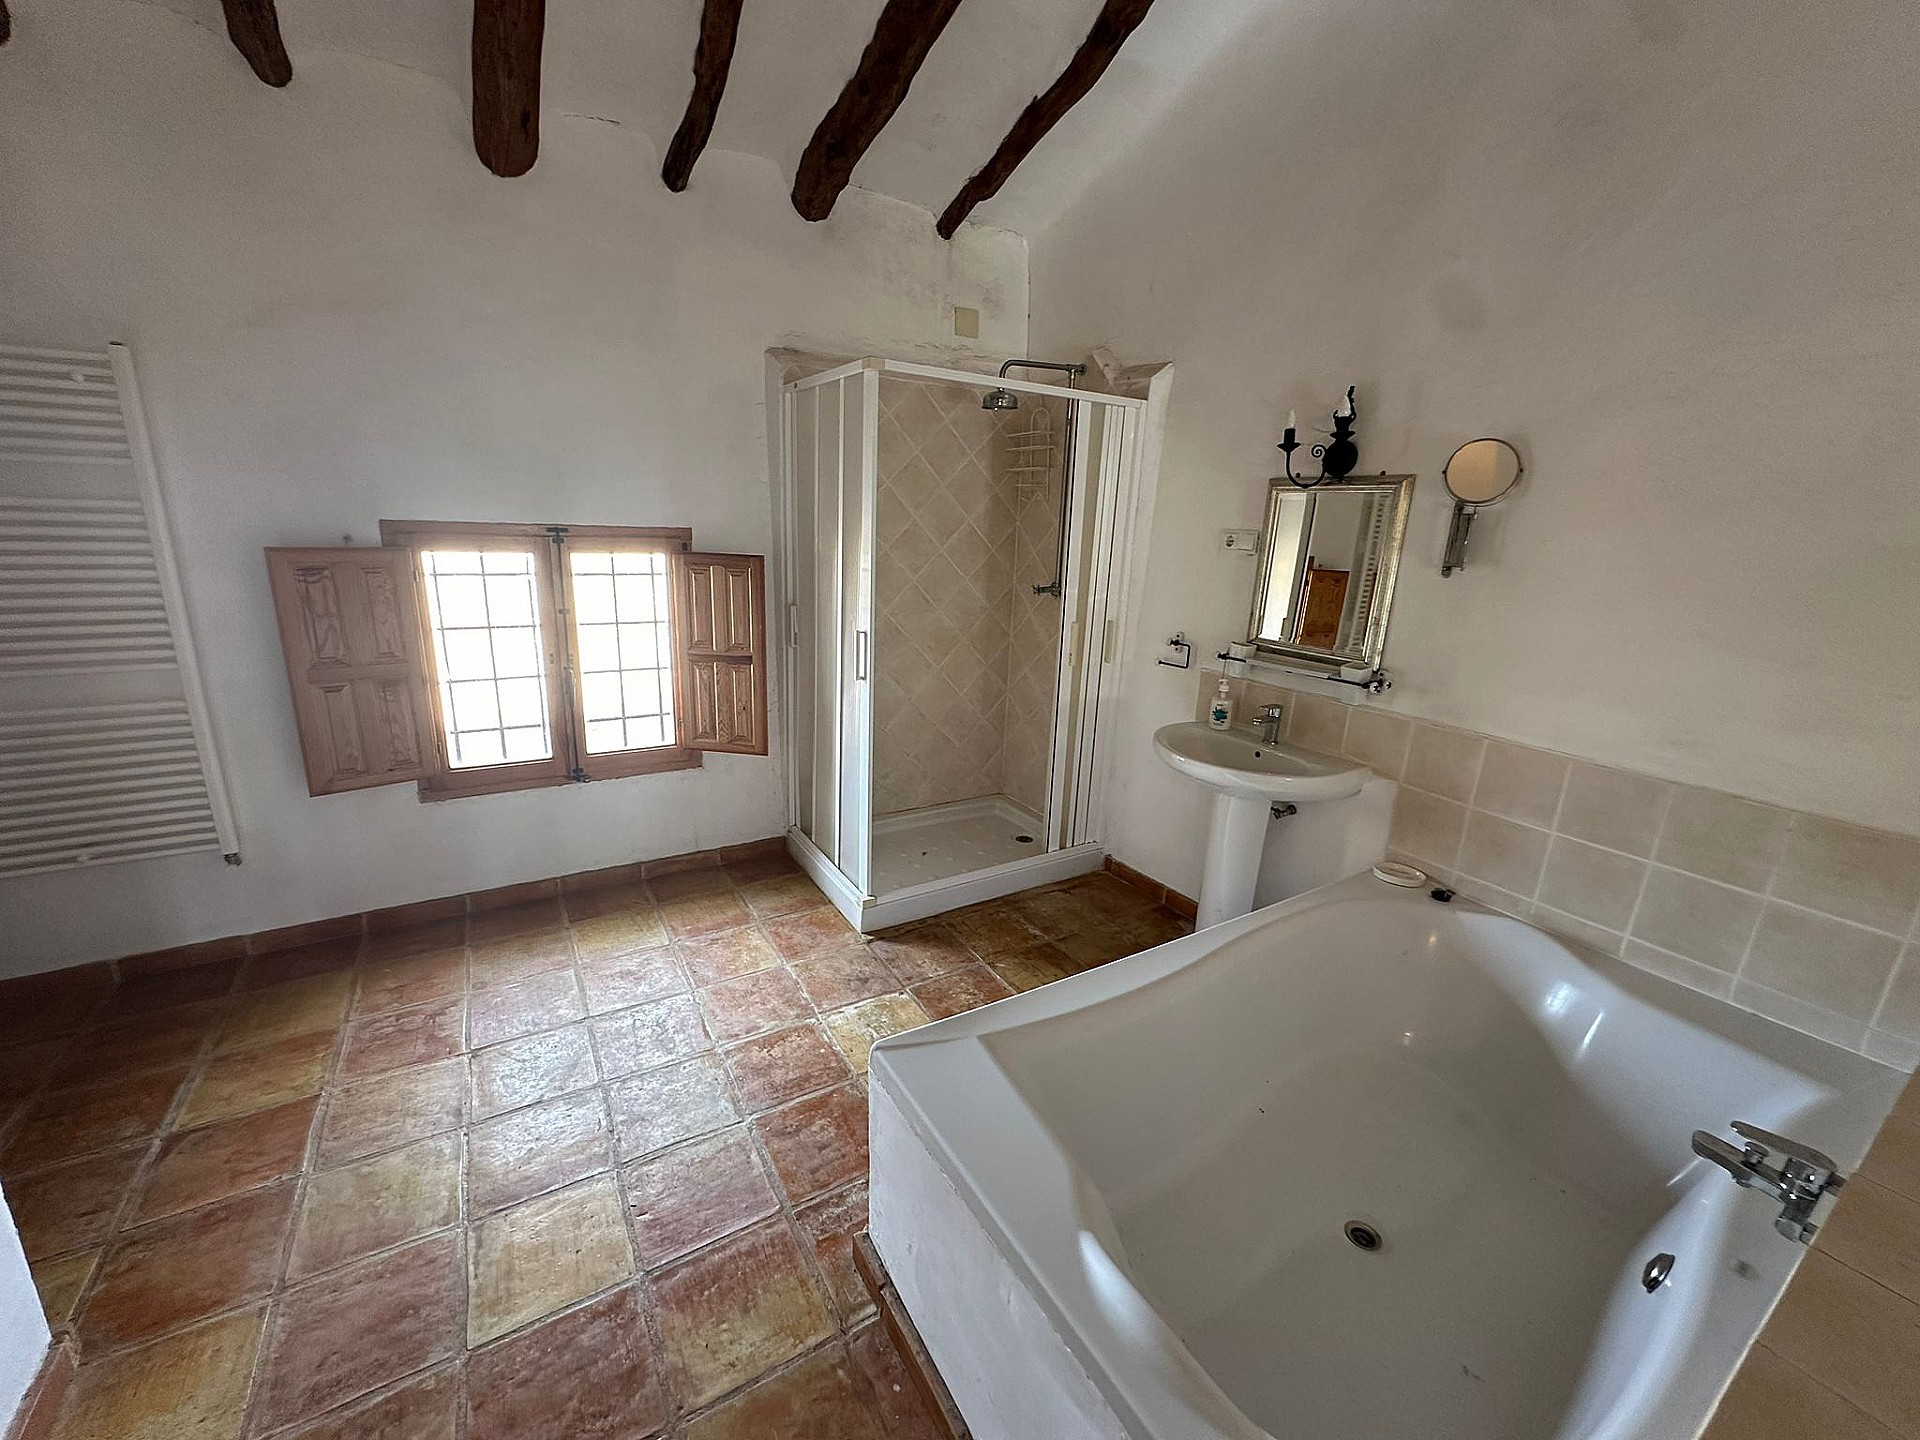 Countryhome for sale in Alicante 18